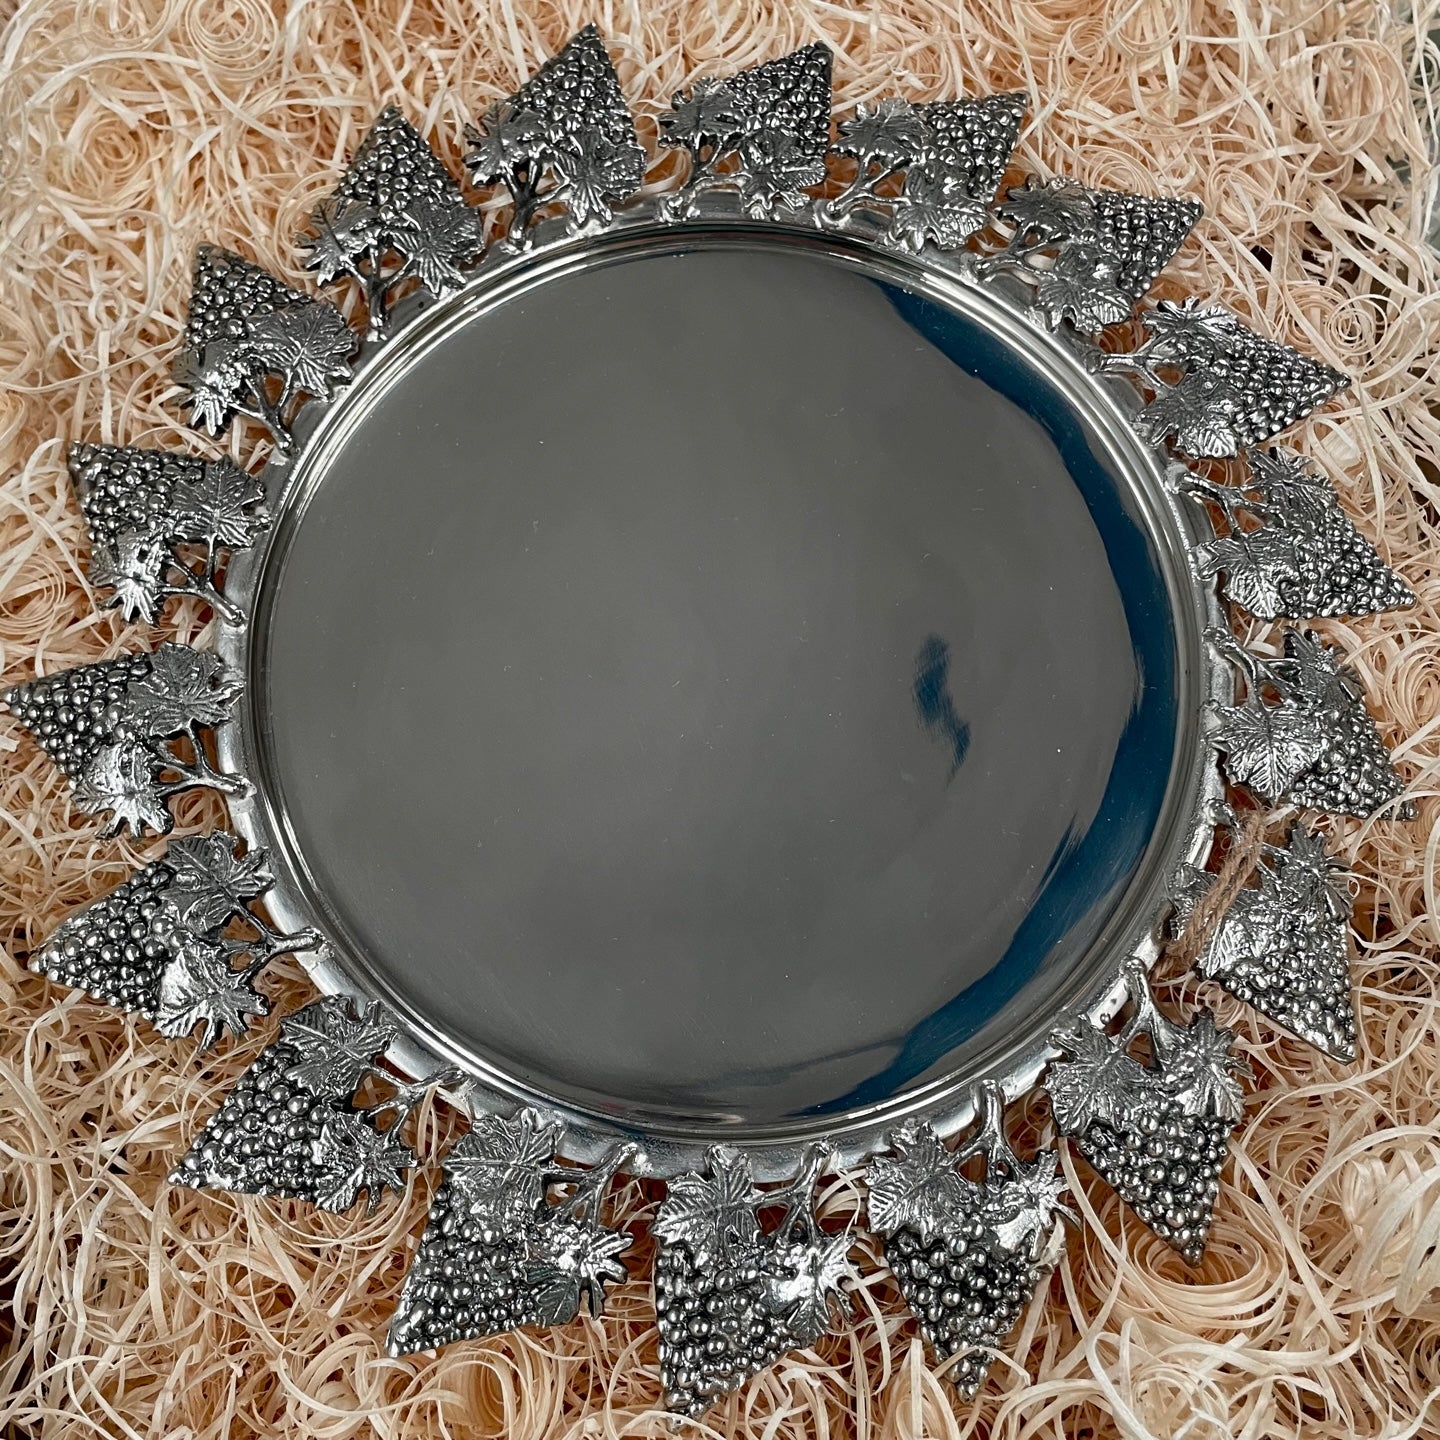 Silver-Plated Grapes Serving Platter